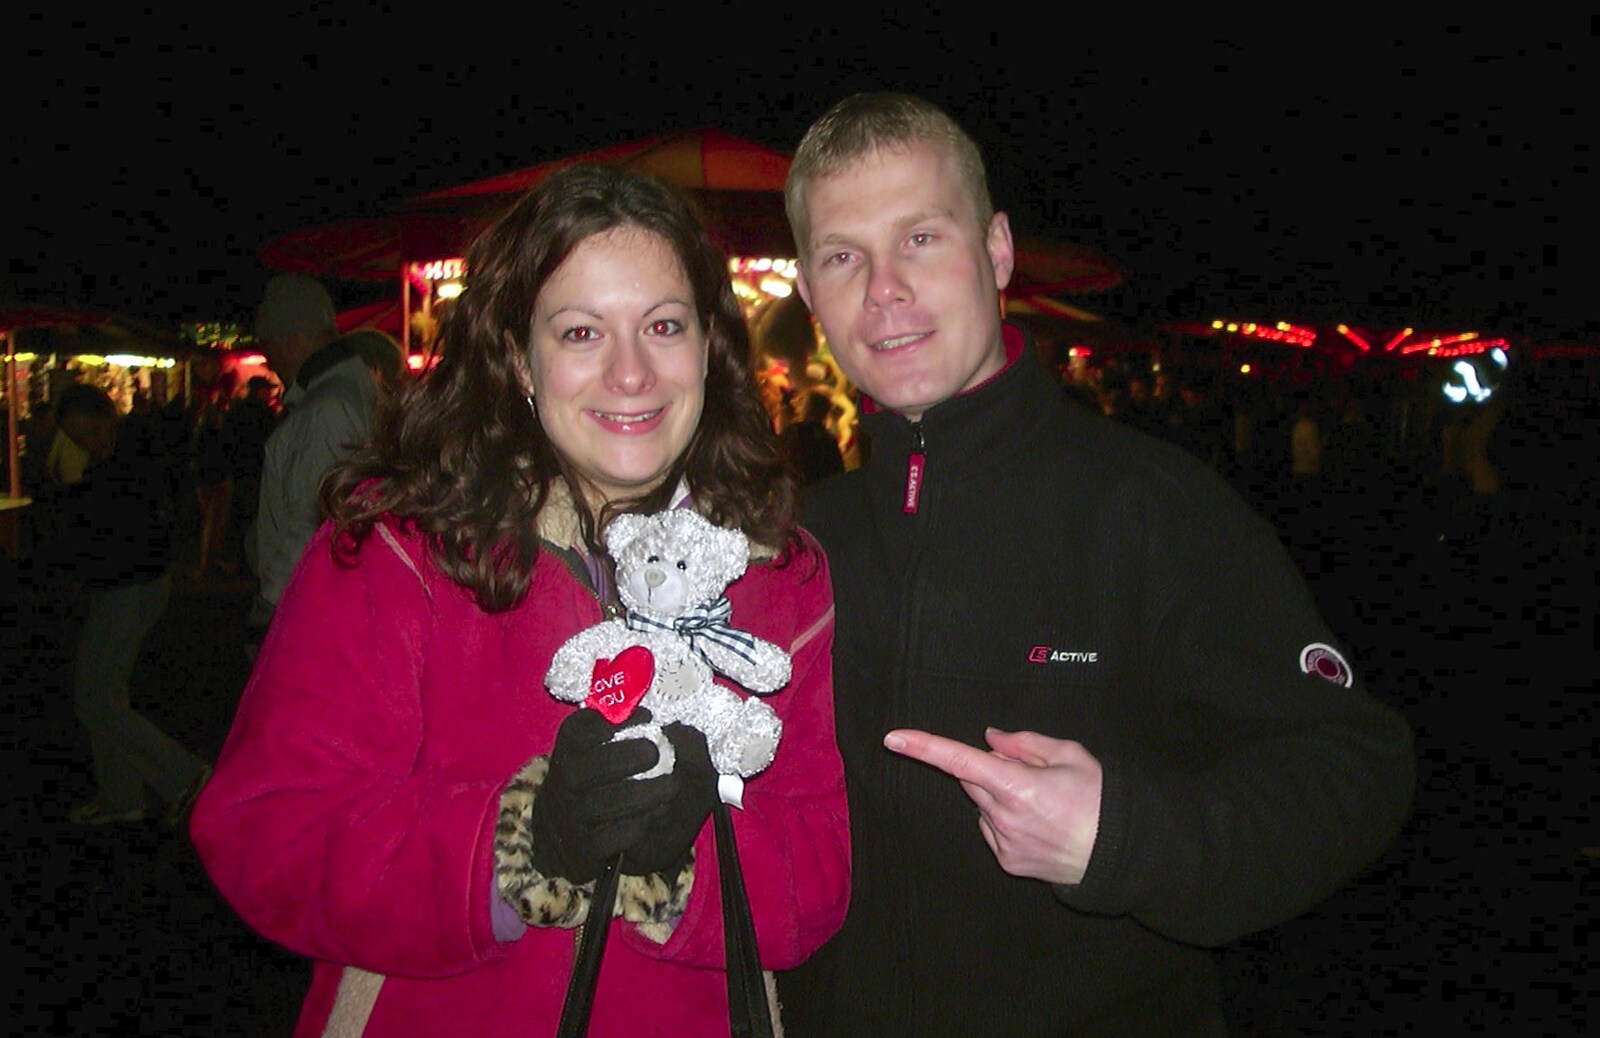 Clare and Mikey from Fireworks and Fairgrounds with Mikey P, Fair Green, Diss, Norfolk - 5th November 2003